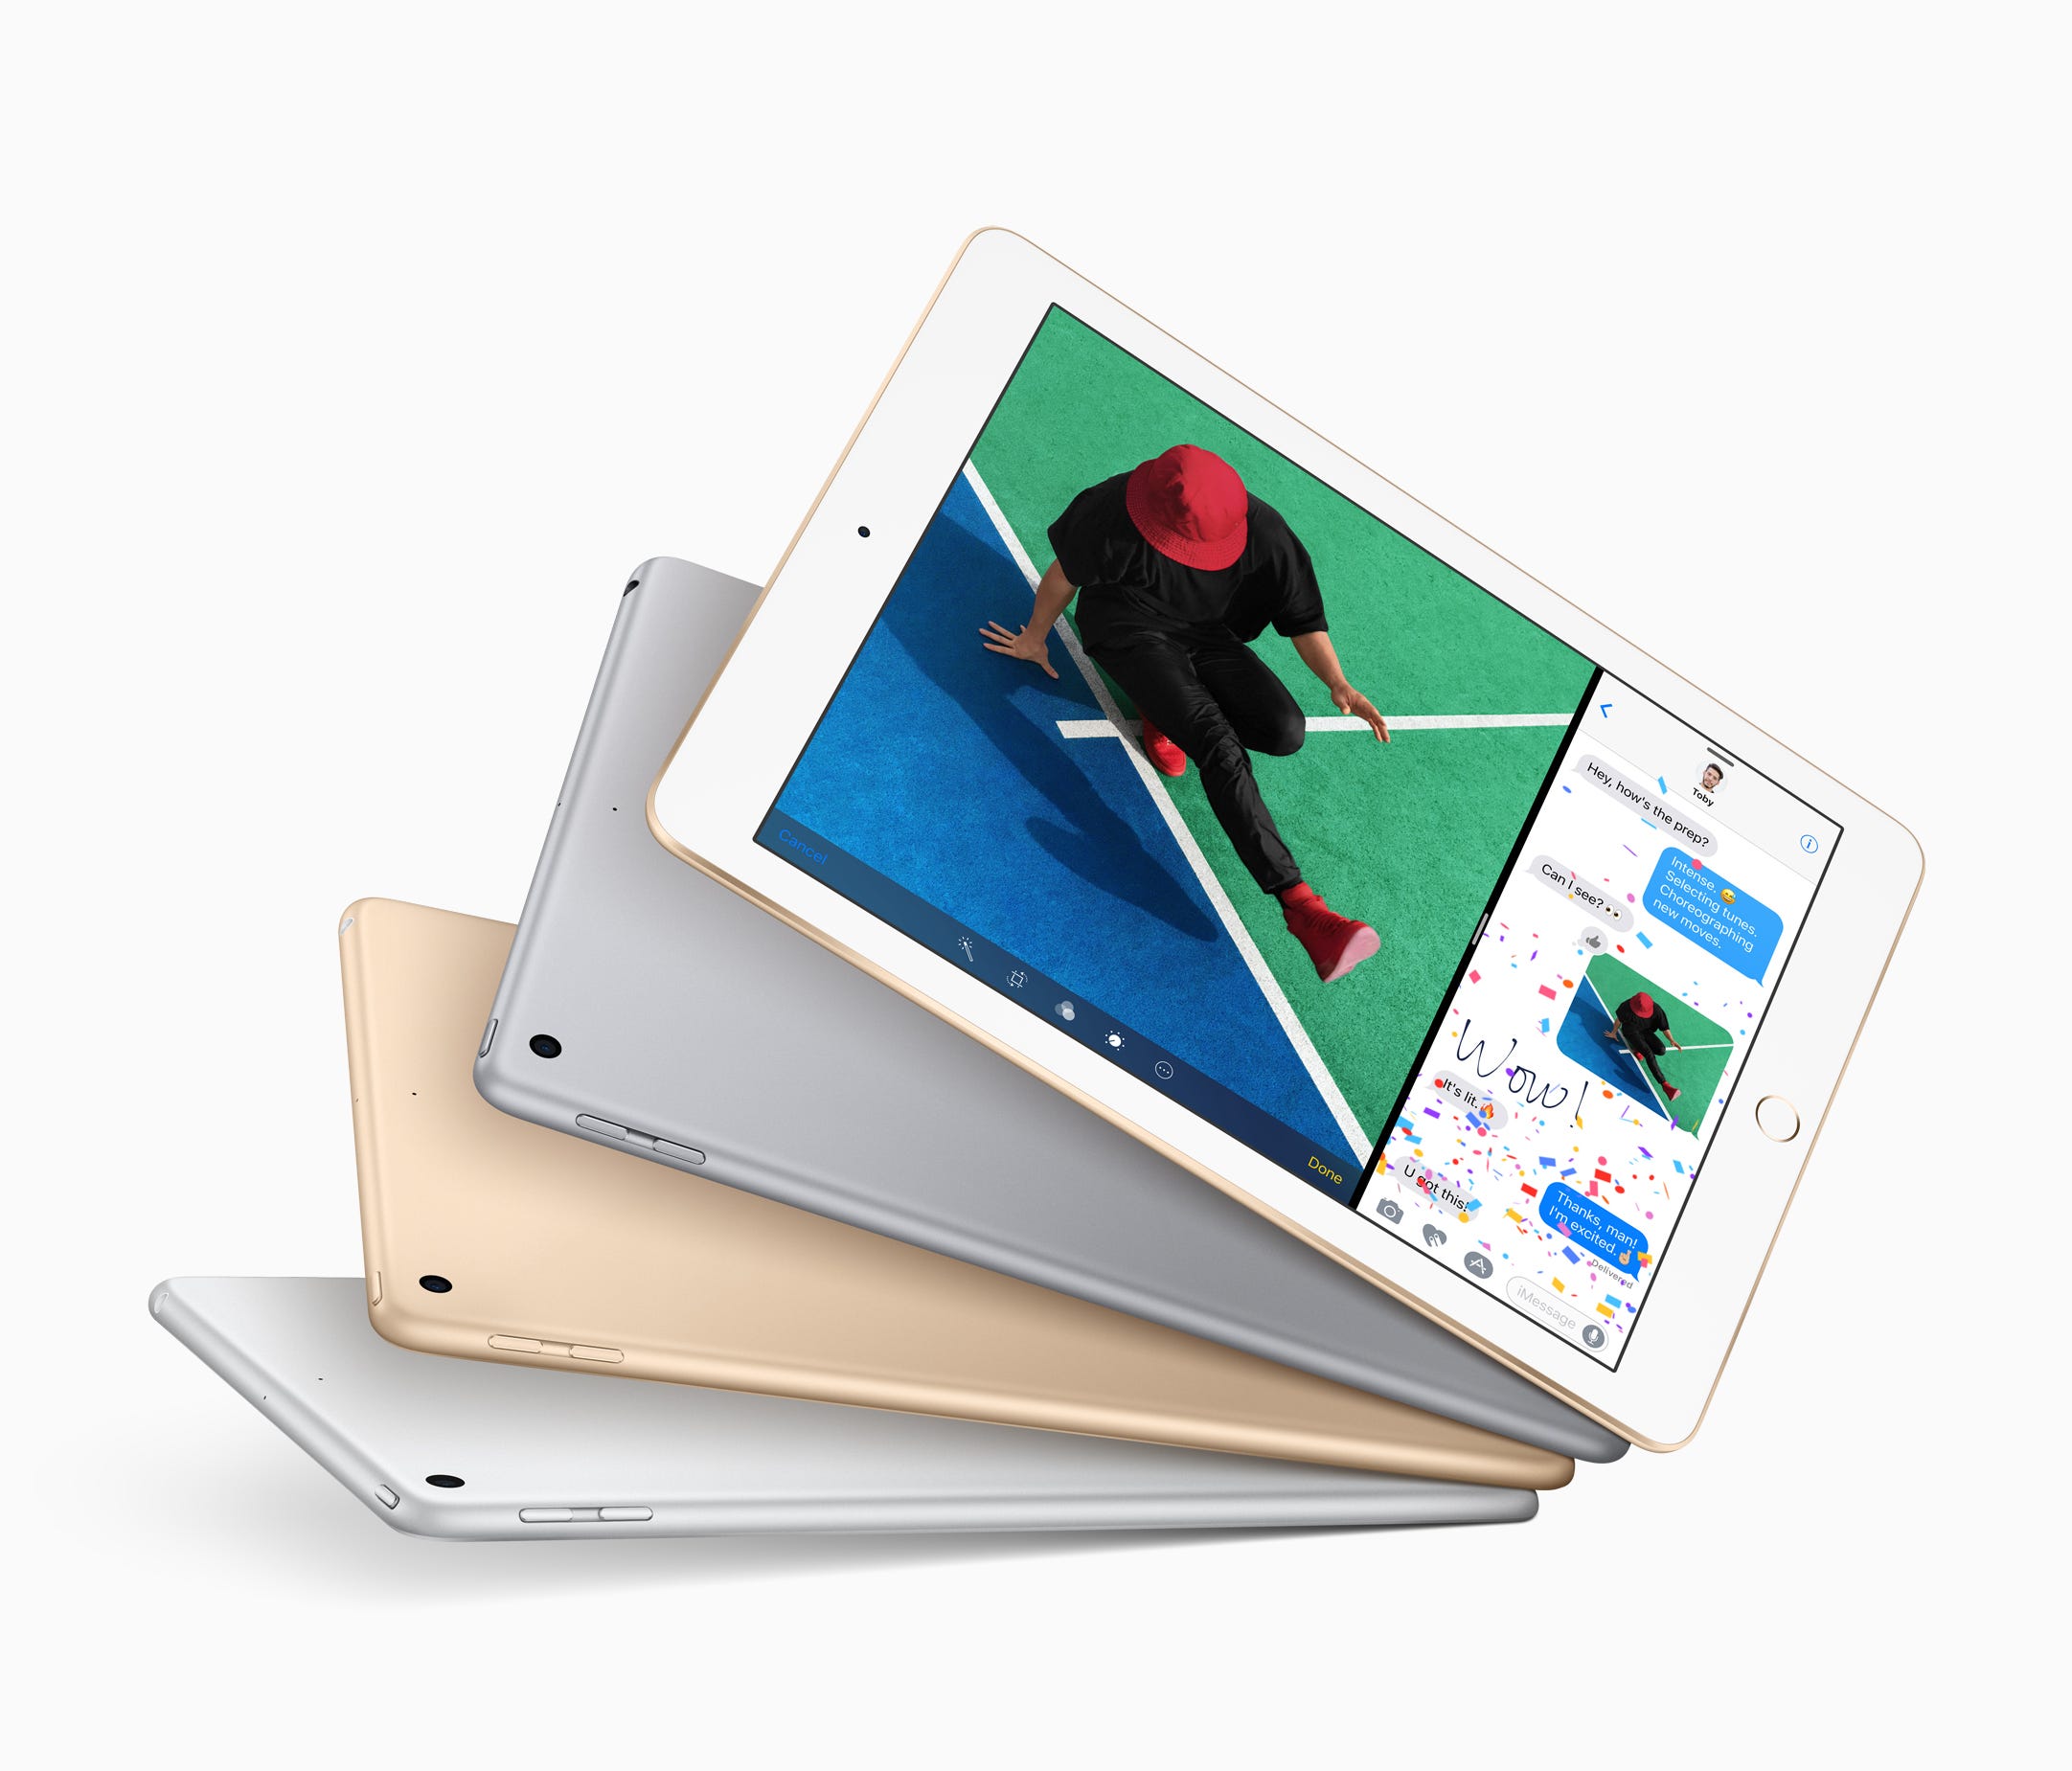 Apple's new iPad, which starts at $329.